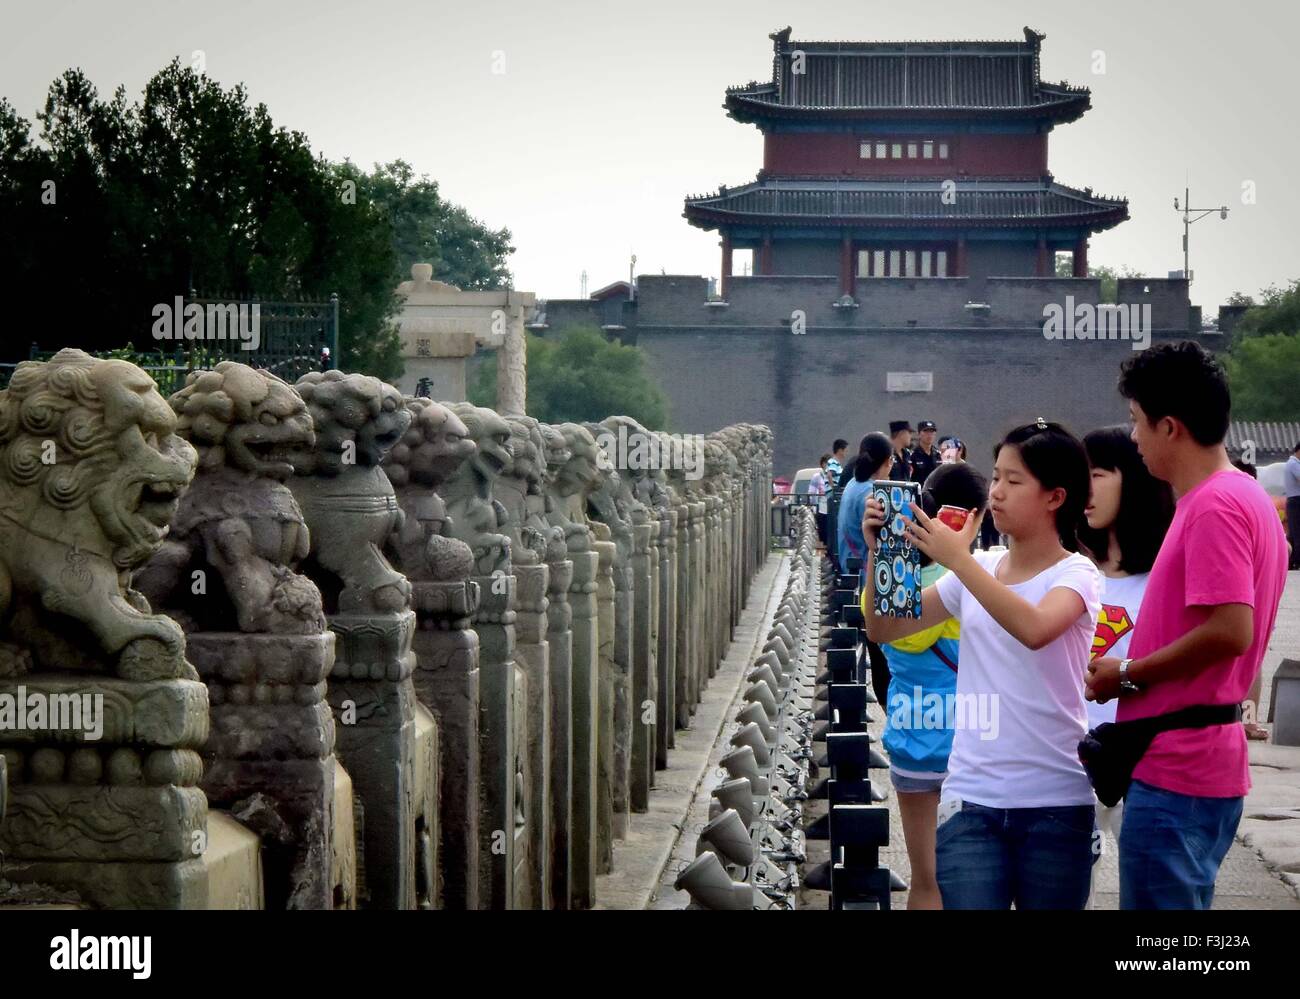 Beijing, China. 26th Aug, 2015. Tourists take photos on the Lugou Bridge across the Yongding River in Beijing, capital of China, Aug. 26, 2015. The Lugou Bridge was originally built in 1189 during the Jin Dynasty and was reconstructed and the Qing Dynasty (1644-1911). The bridge is 266.5 meters long and 7.5 meters wide, with 11 arches. And there are altogether 485 stone lions carved on the columns. © Wang Song/Xinhua/Alamy Live News Stock Photo